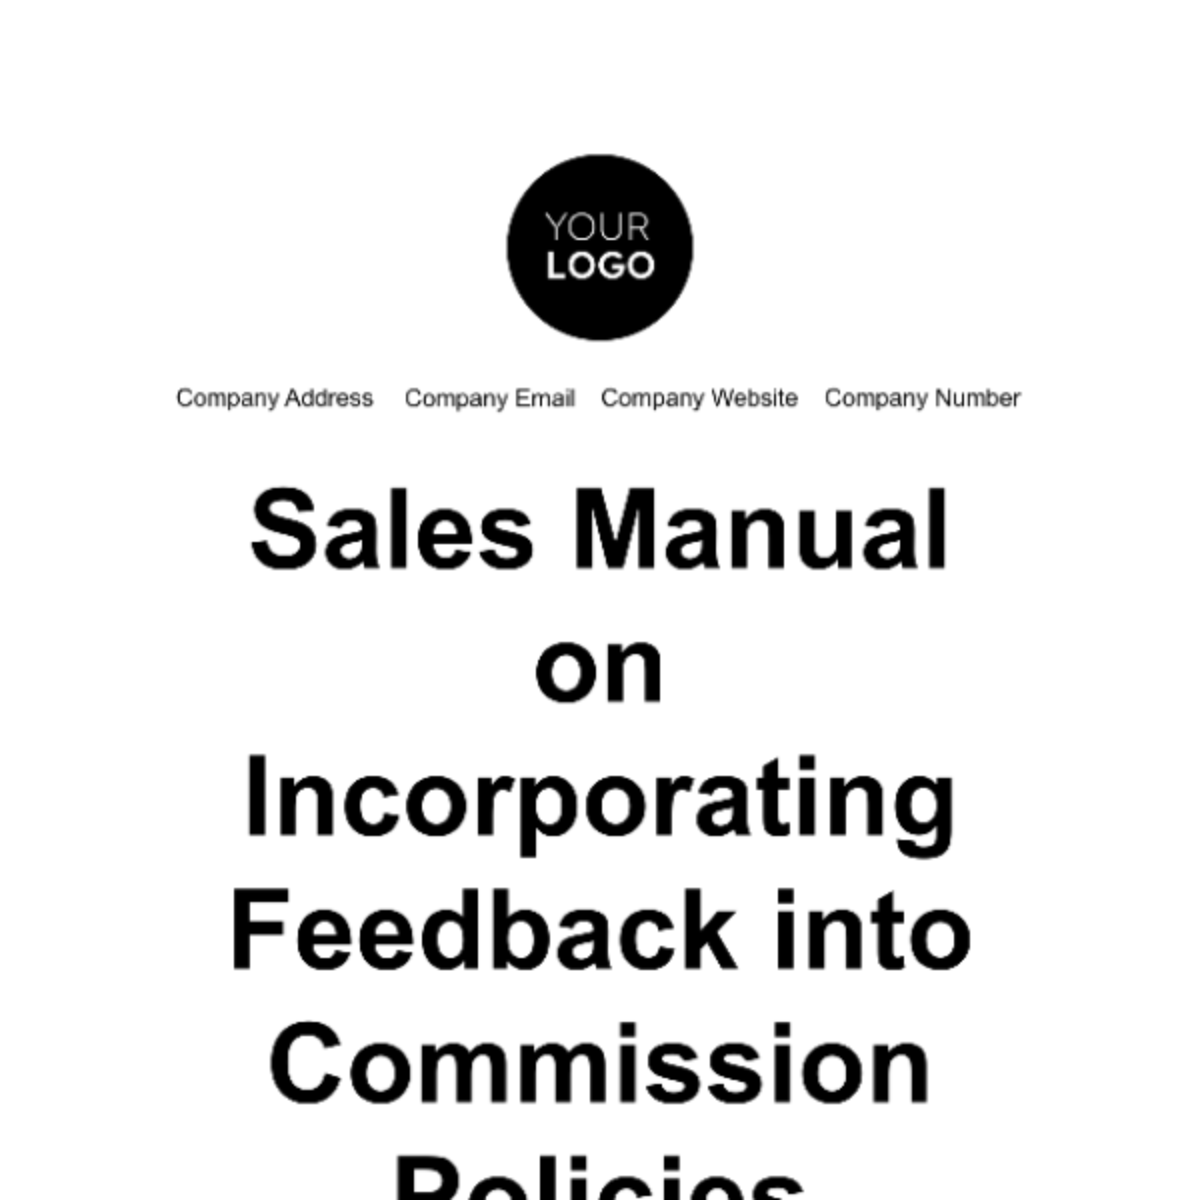 Free Sales Manual on Incorporating Feedback into Commission Policies Template